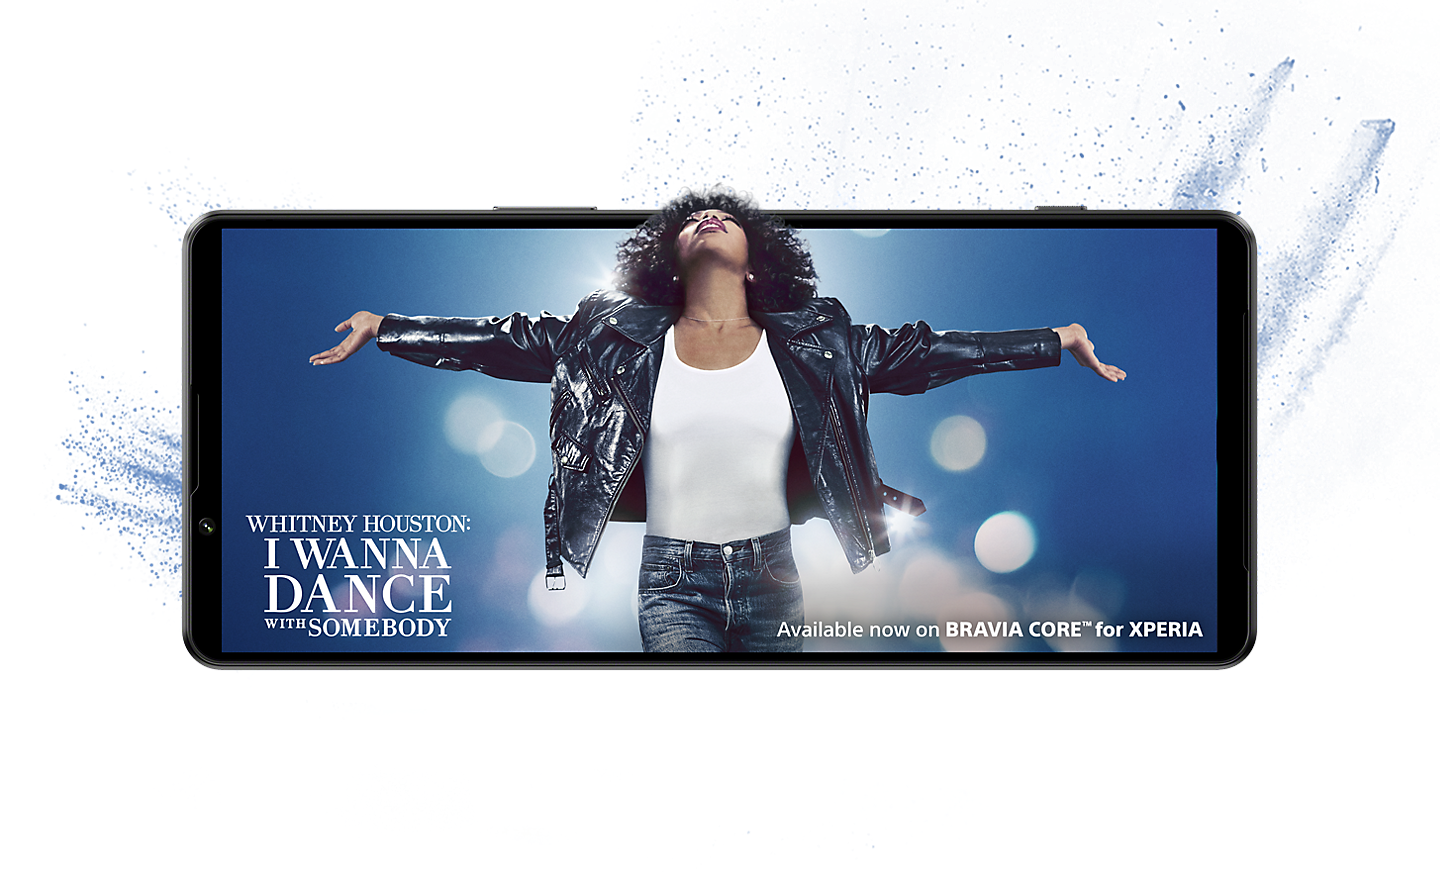 Image of an Xperia smartphone showing the Whitney Huston film I Wanna Dance With Somebody on-screen